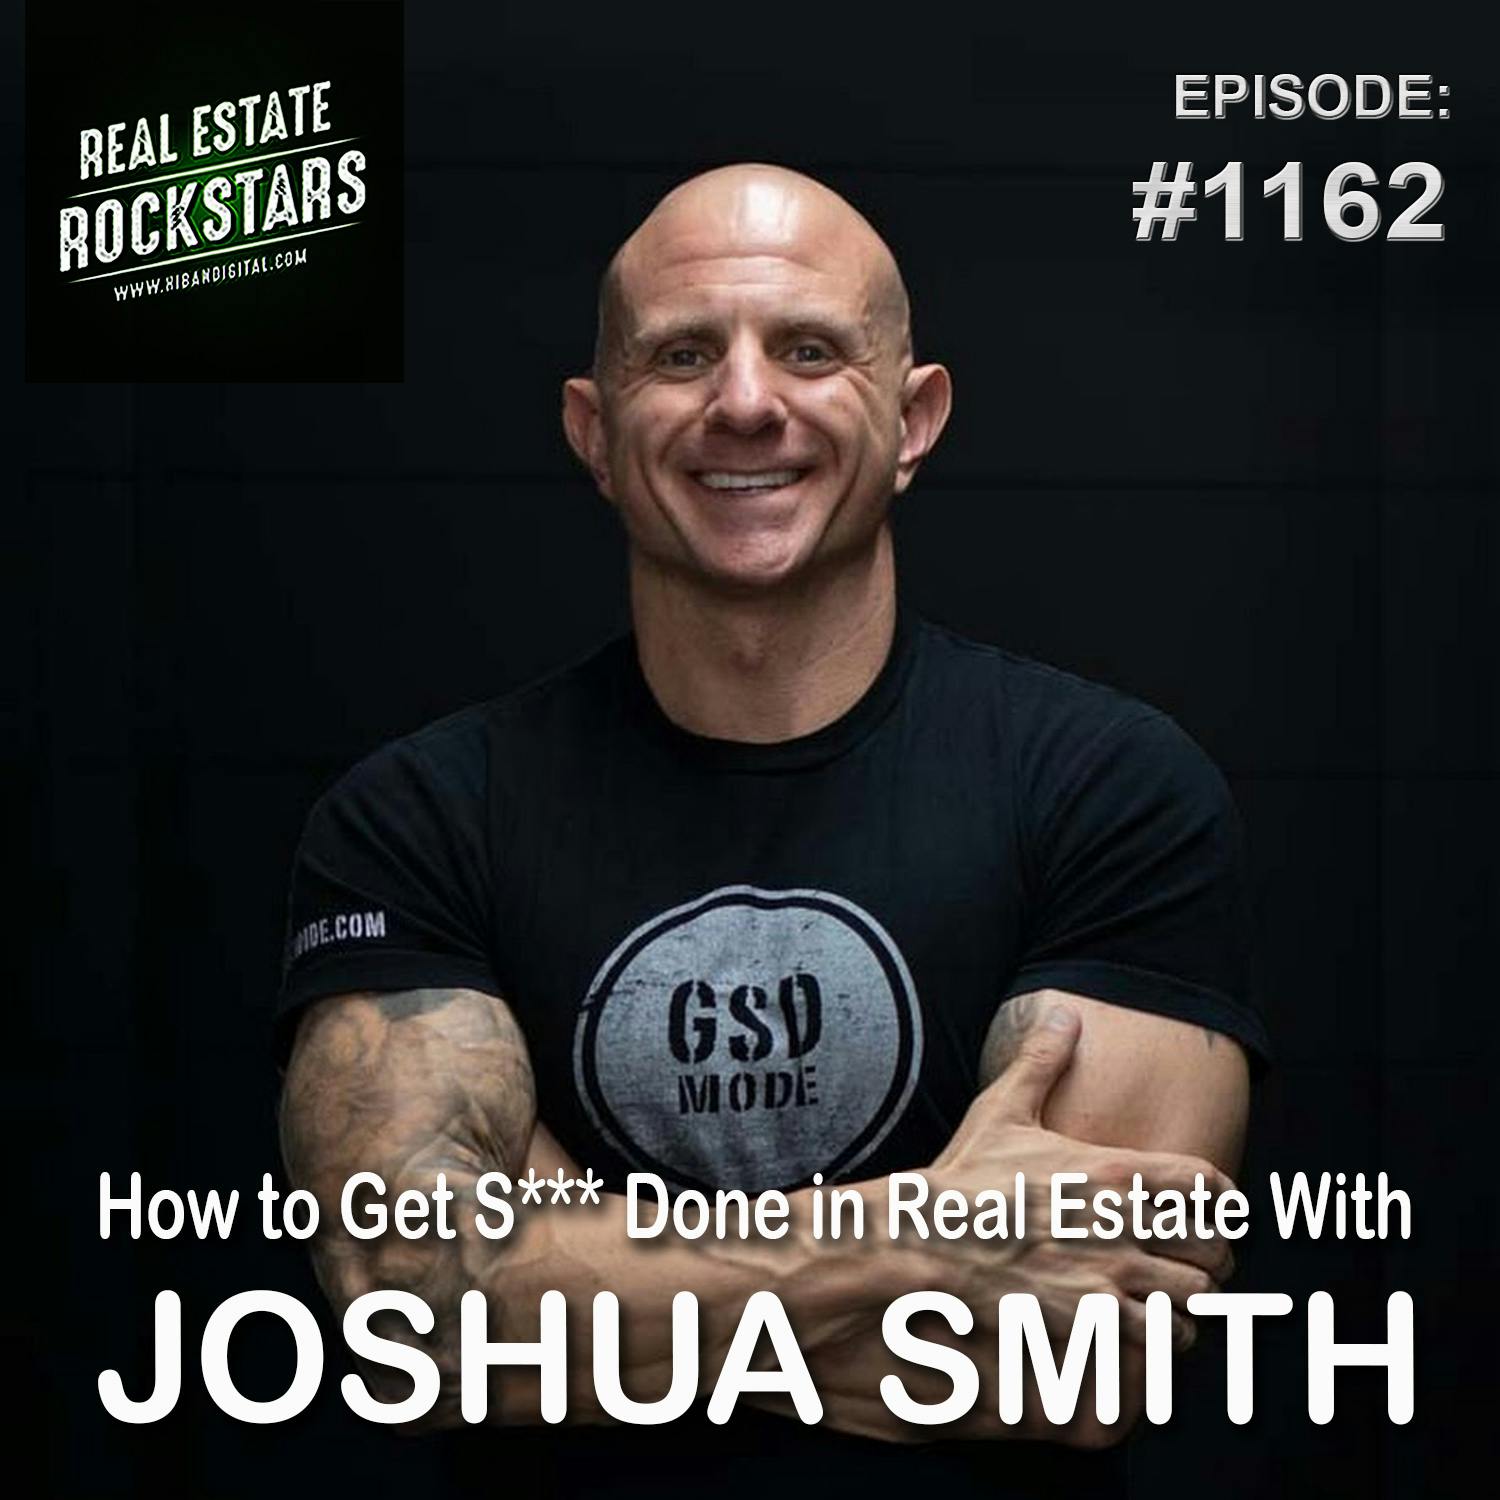 1162: How to Get S*** Done in Real Estate With Joshua Smith